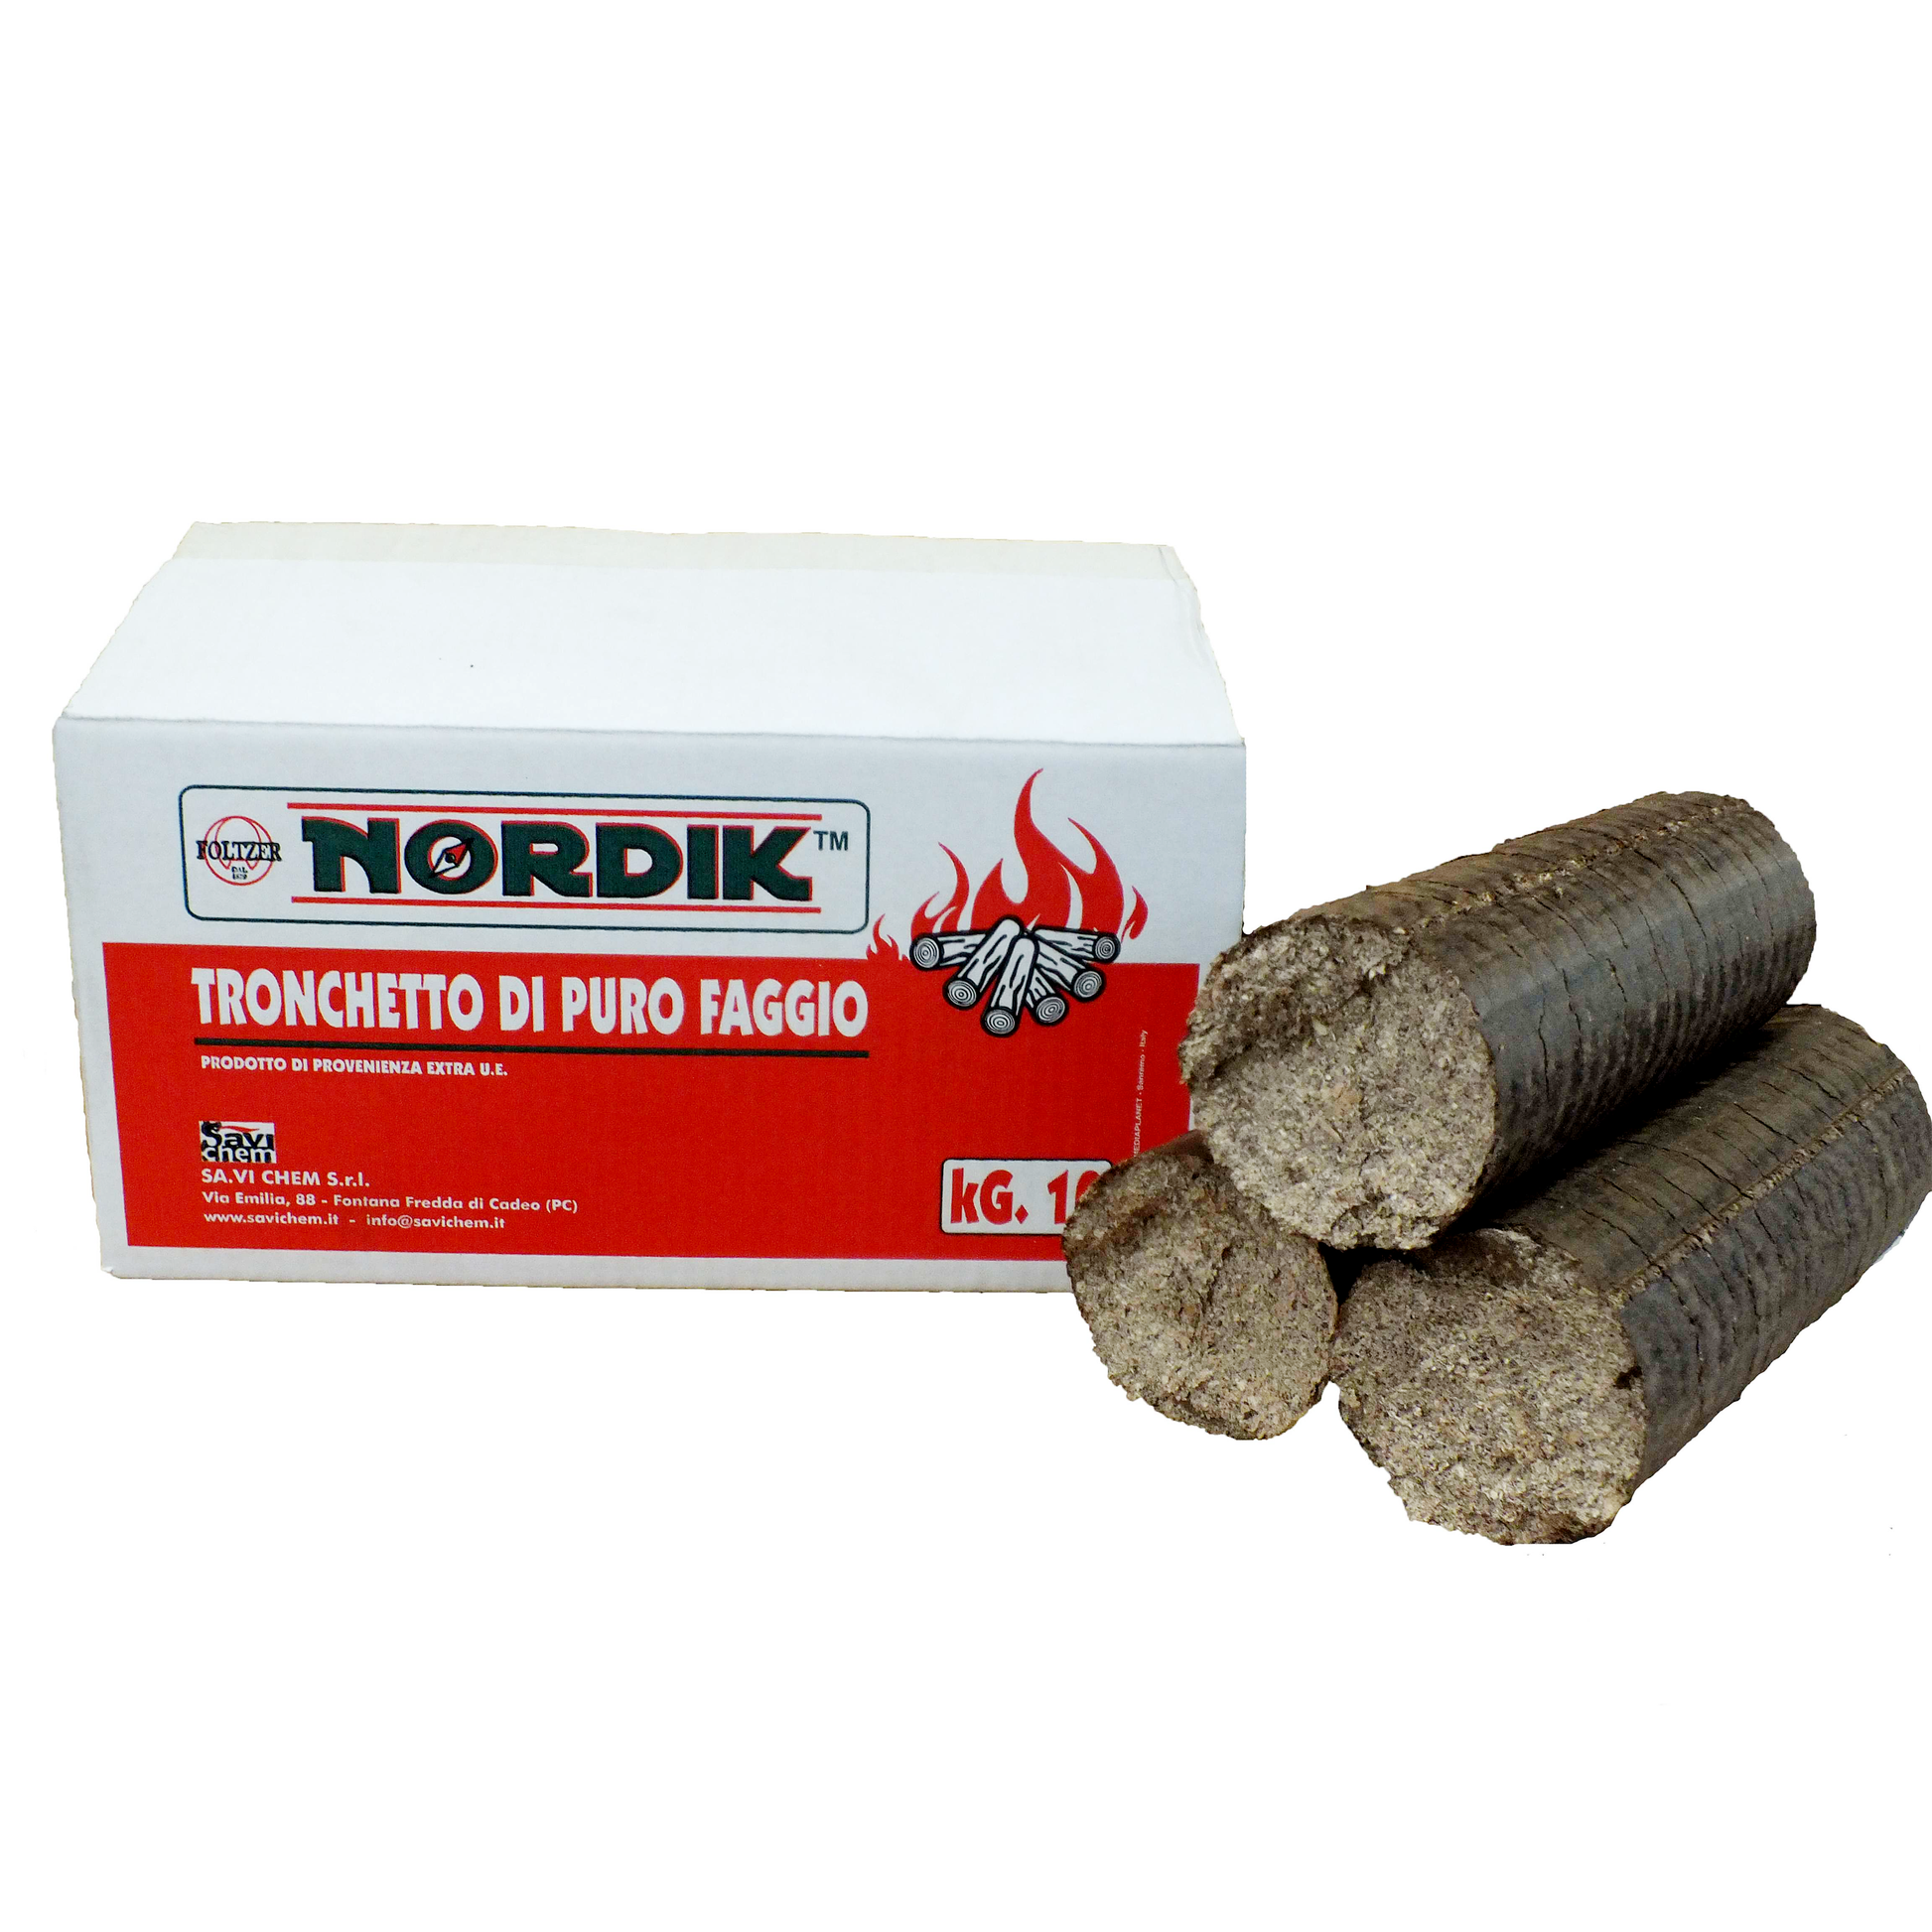 Compressed Beech Wood Logs in boxes of 10kg - best price from Maltashopper.com B10074410